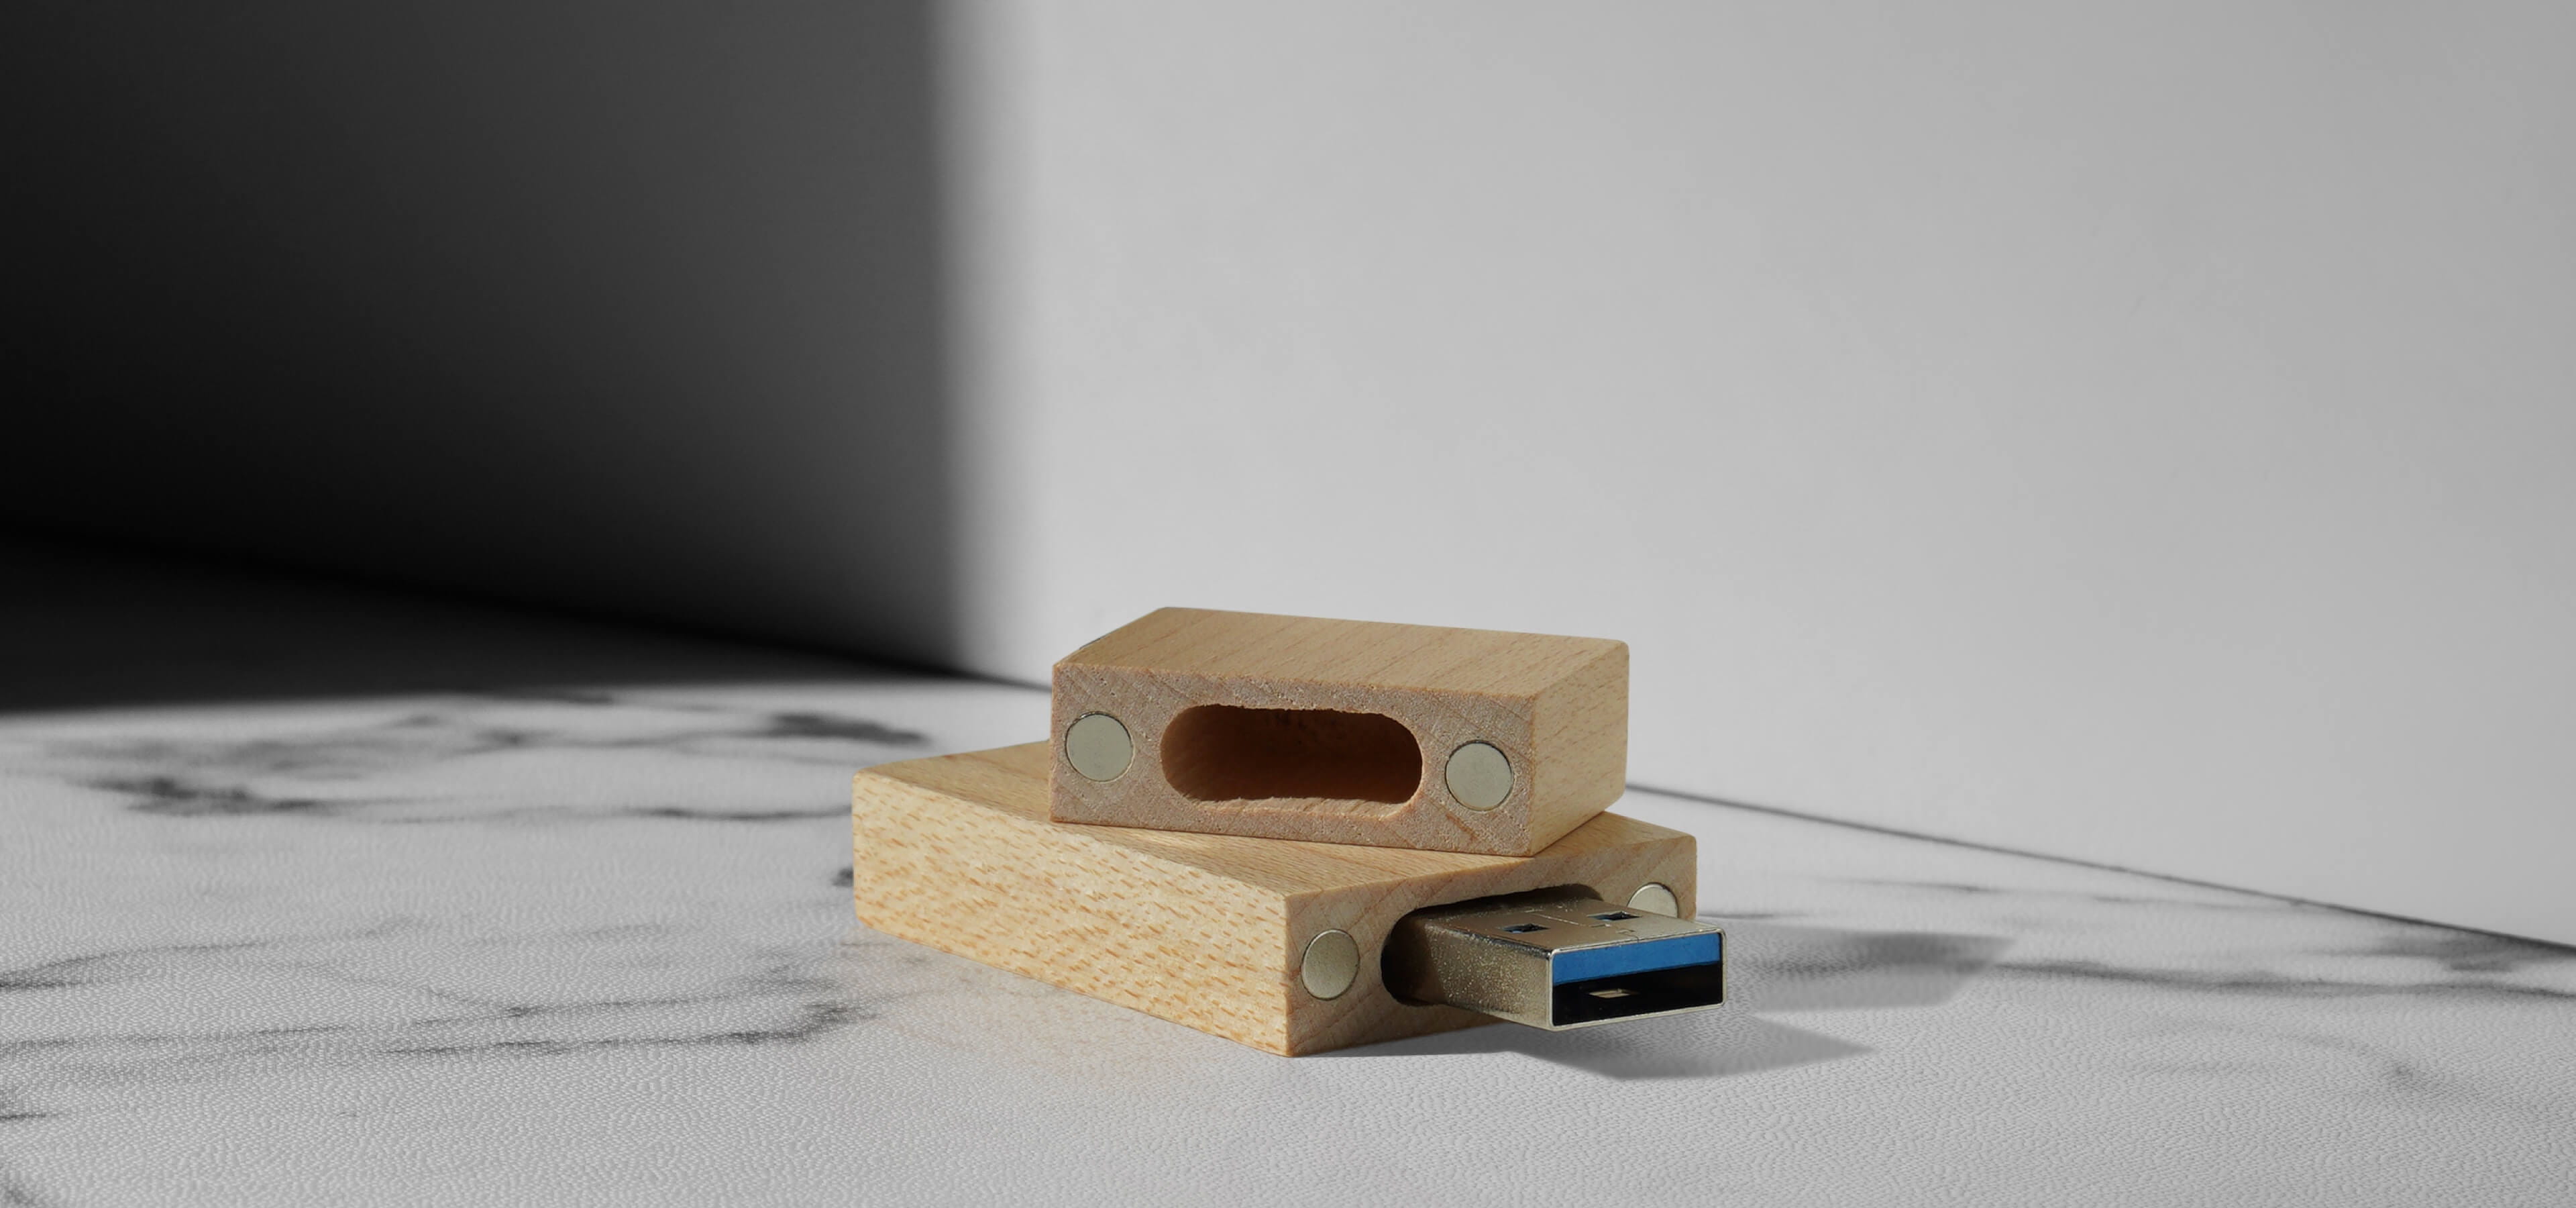 wood usb drive showing magnets on inside of cap sitting on table